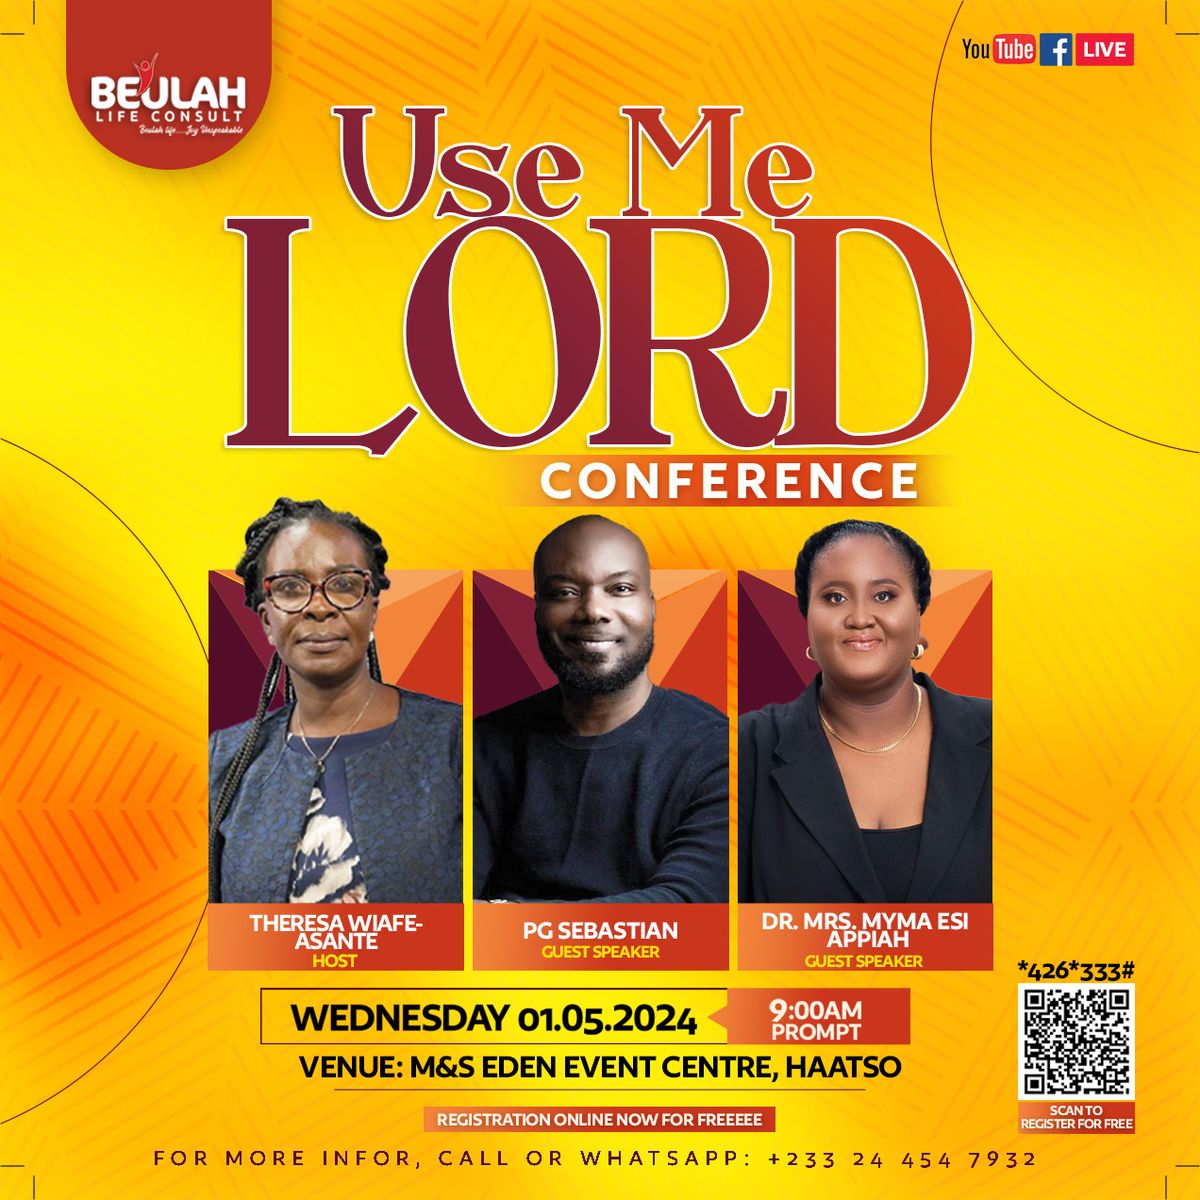 USE ME LORD CONFERENCE